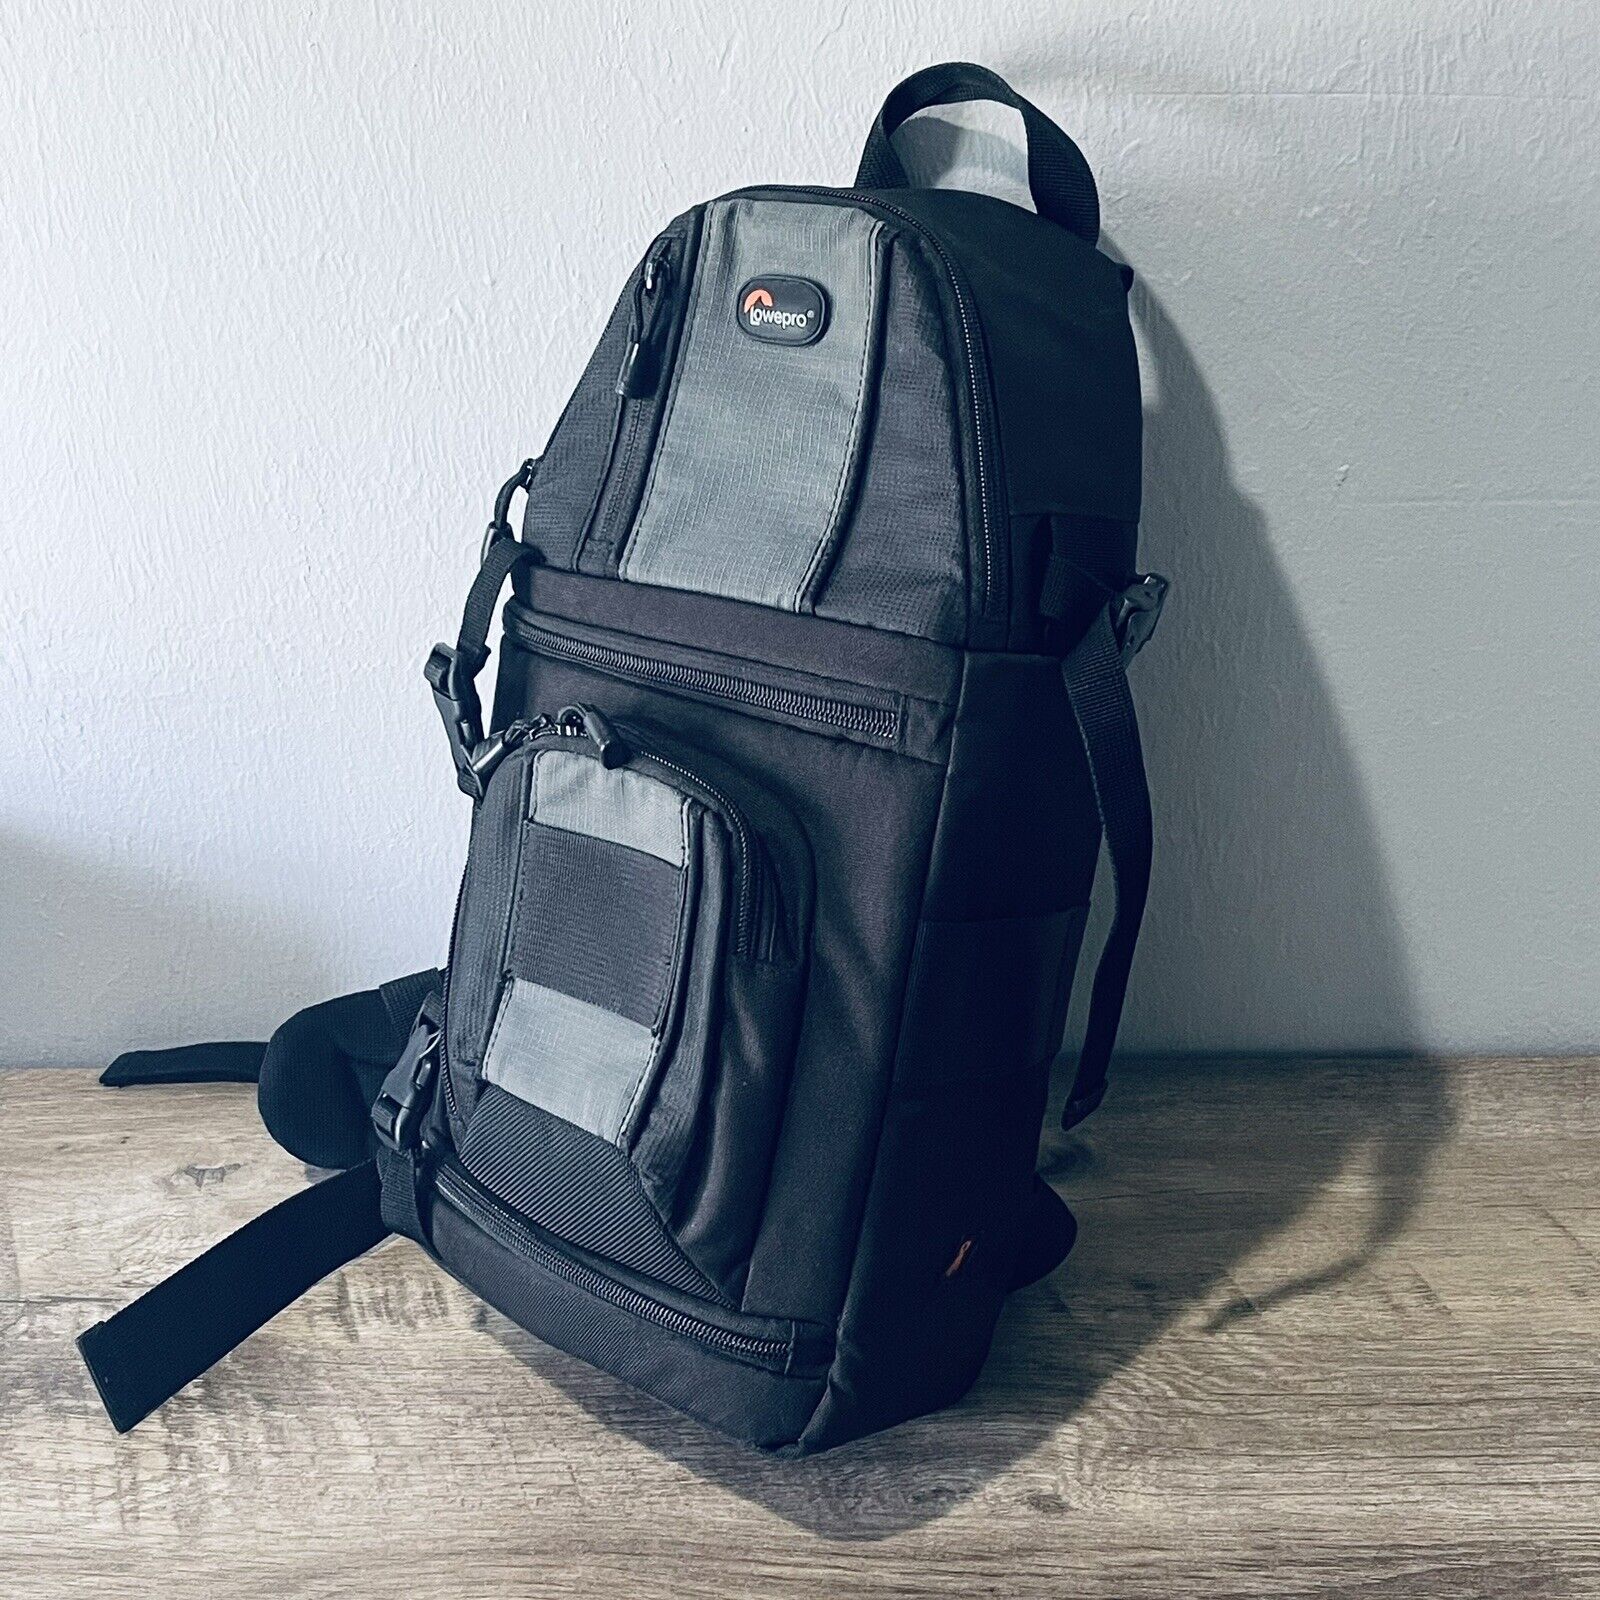 Drone Photography Backpack: Lowepro Slingshot 102 AW